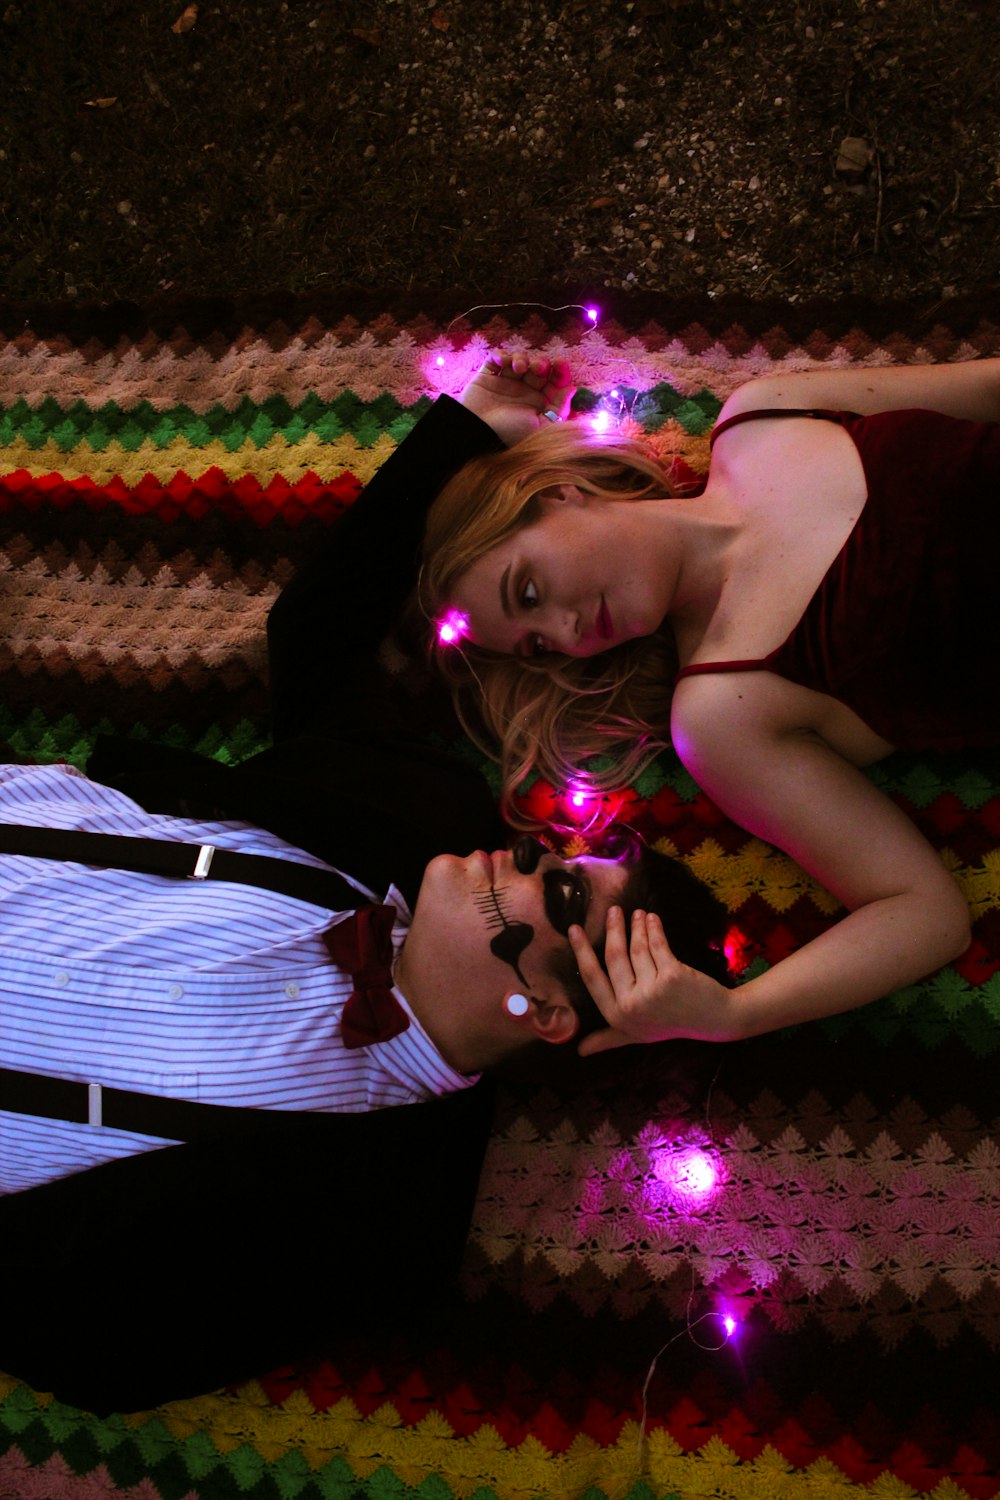 a man and a woman laying on a rug with lights